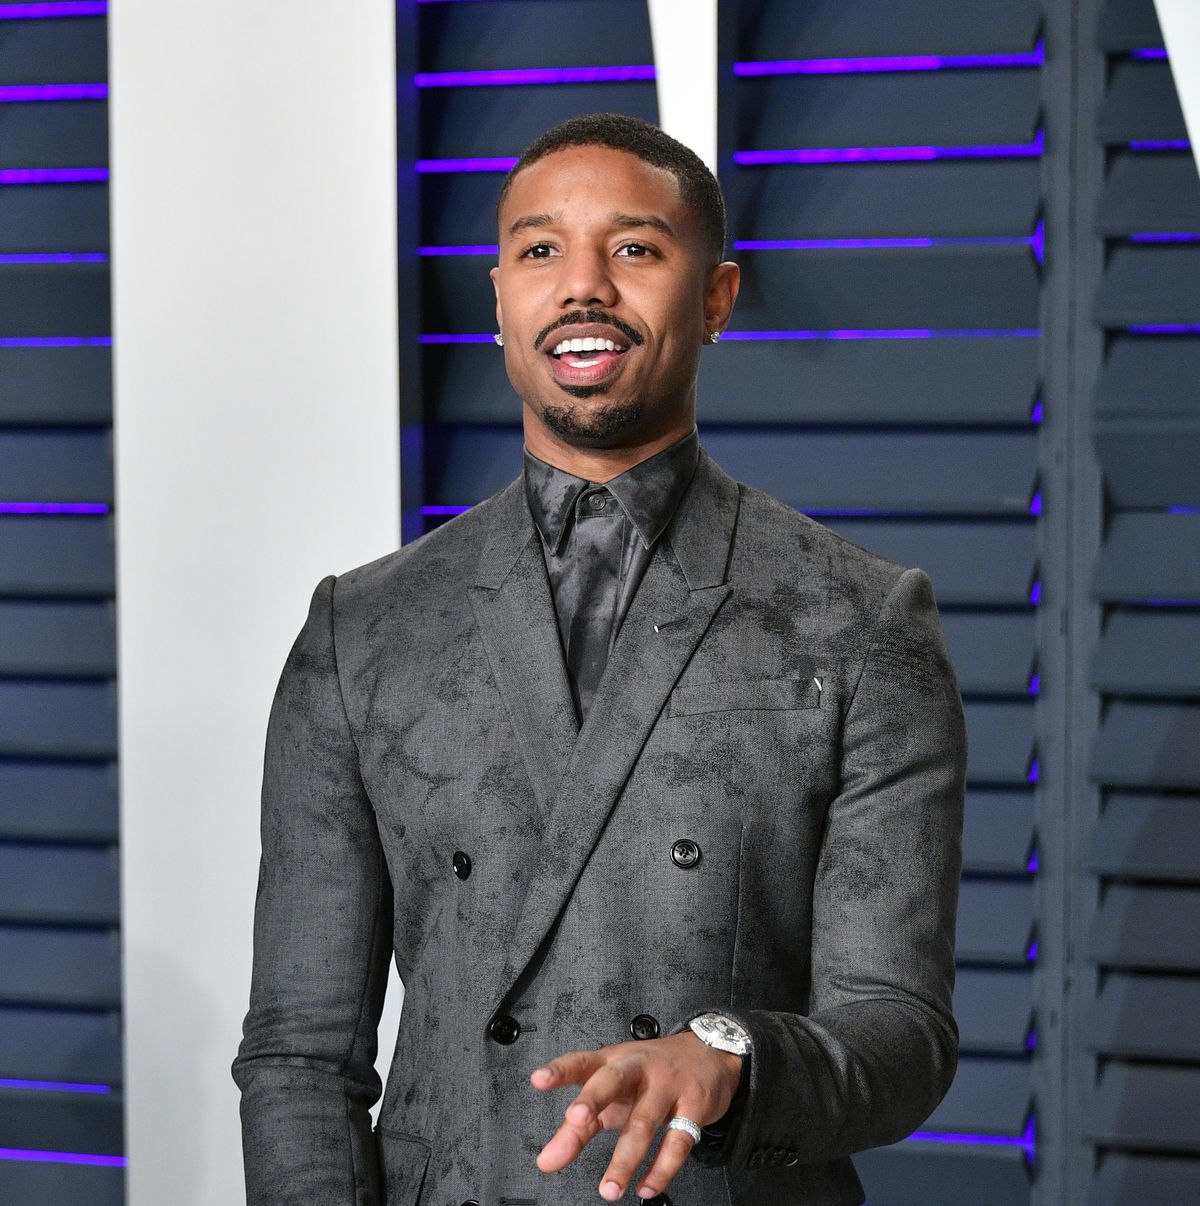 Prada - Michael B. Jordan wore a #Prada Blue navy wool and mohair double  breasted tuxedo and black stretch poplin shirt while attending the Critic  Choice Association's 5th Annual Celebration of Black